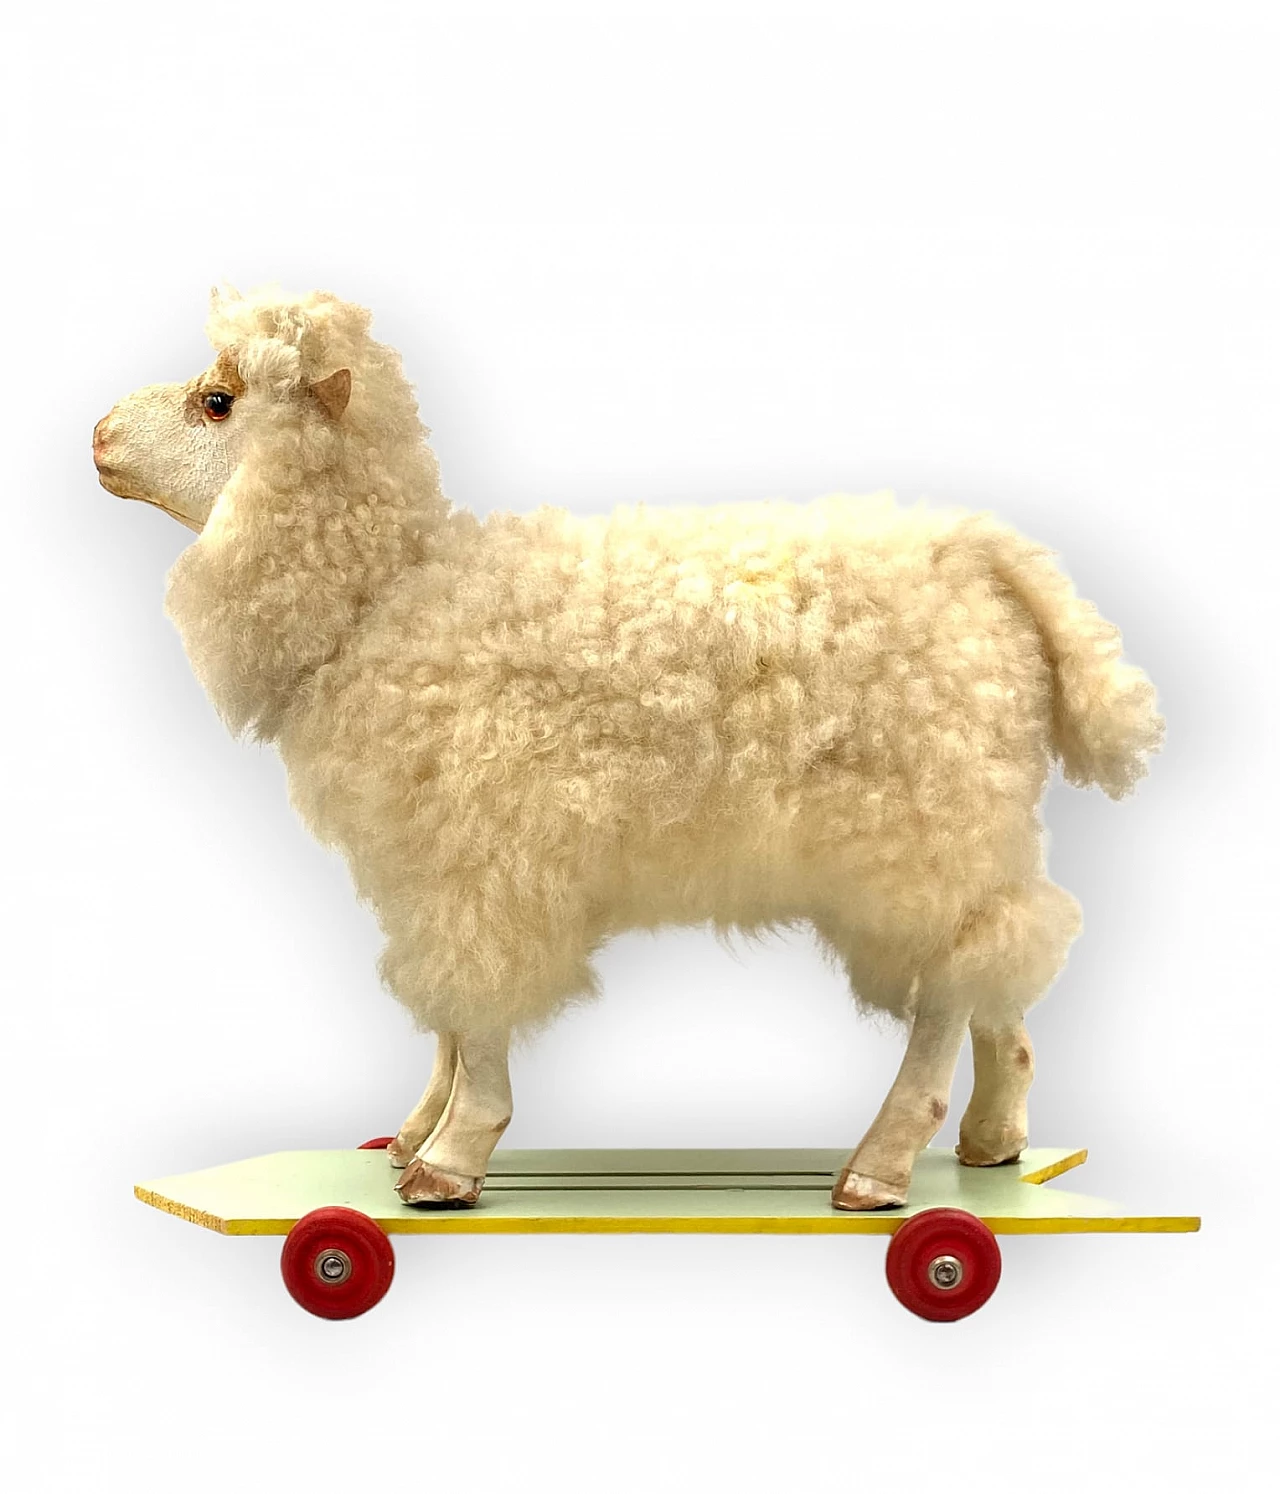 Wool and wood toy sheep with wheels 8